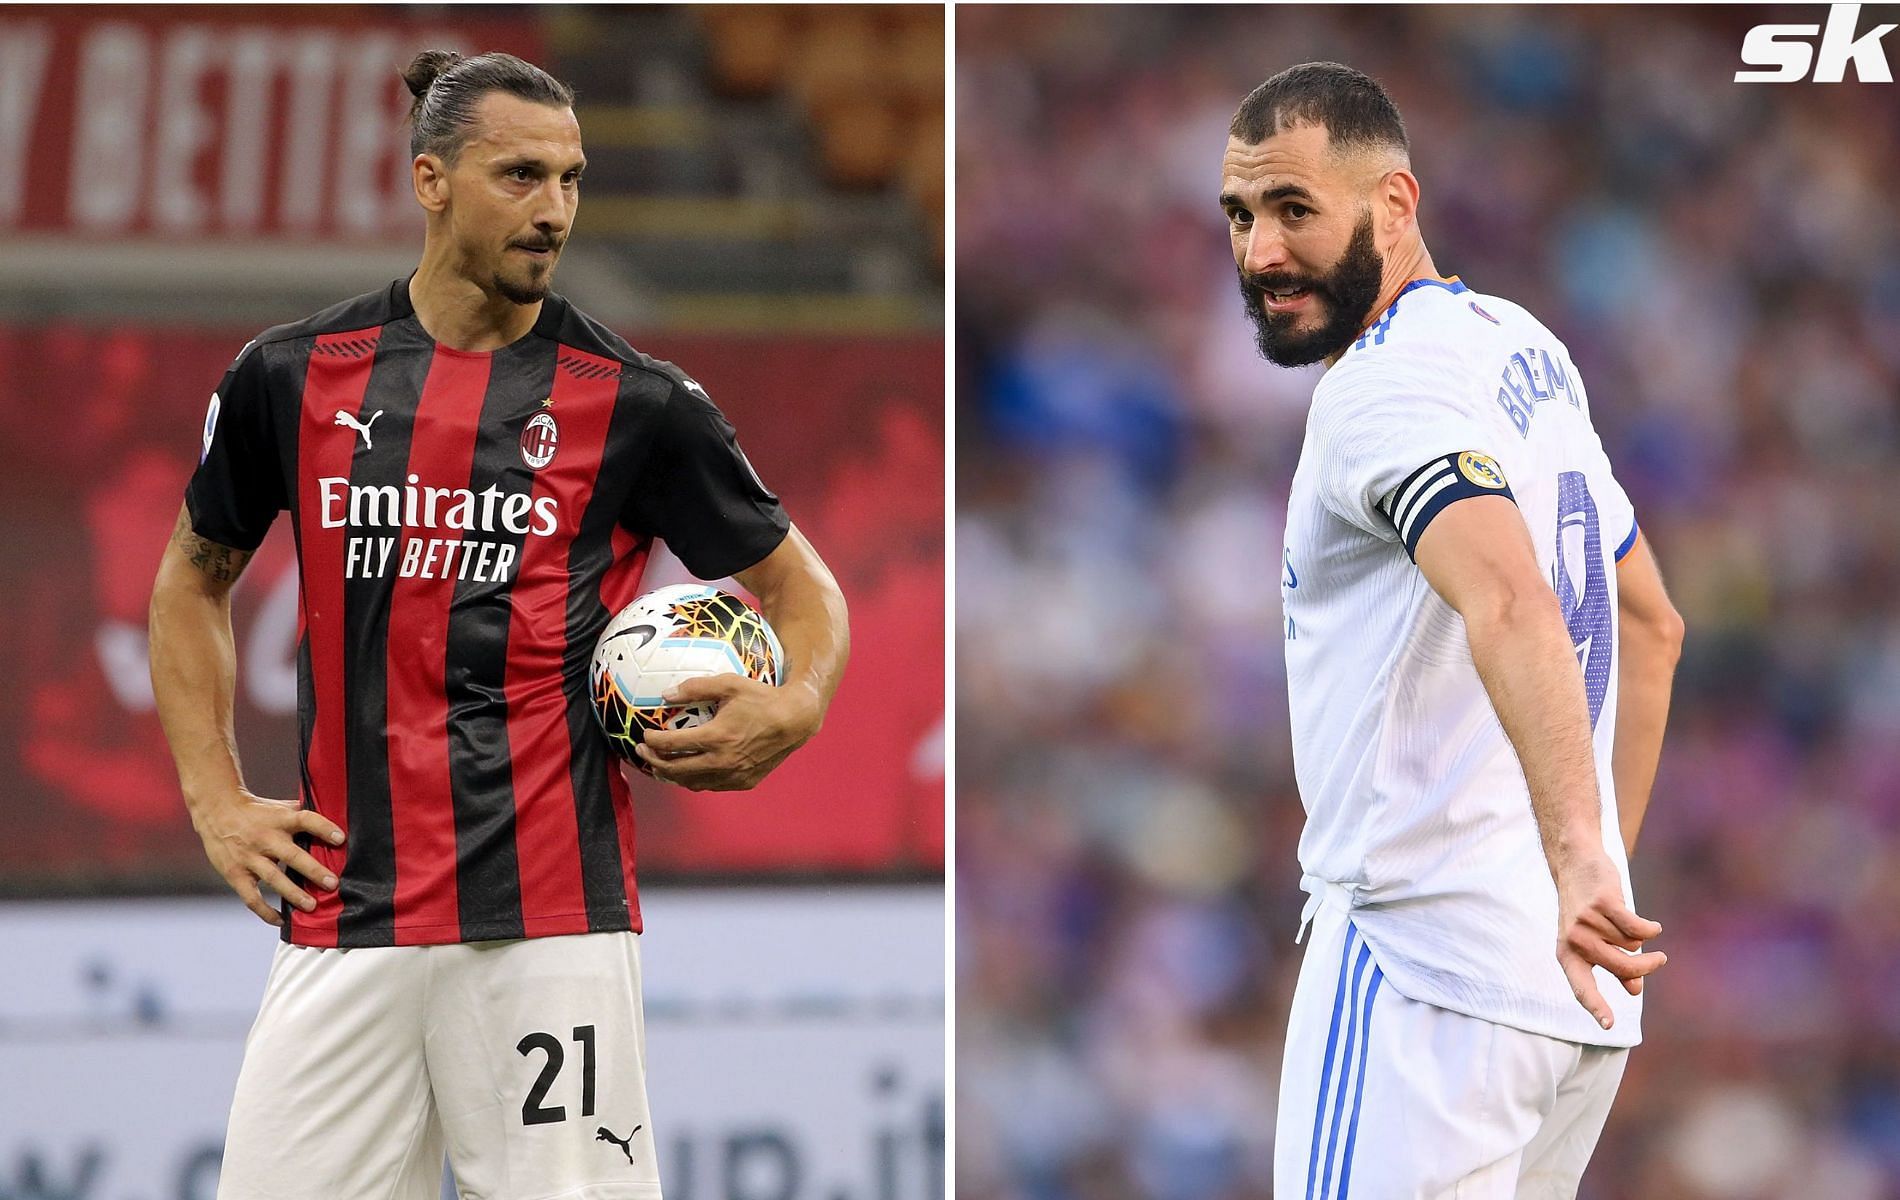 Karim Benzema and Zlatan Ibrahimovic are two of several top attackers who never won the European Golden Boot award.